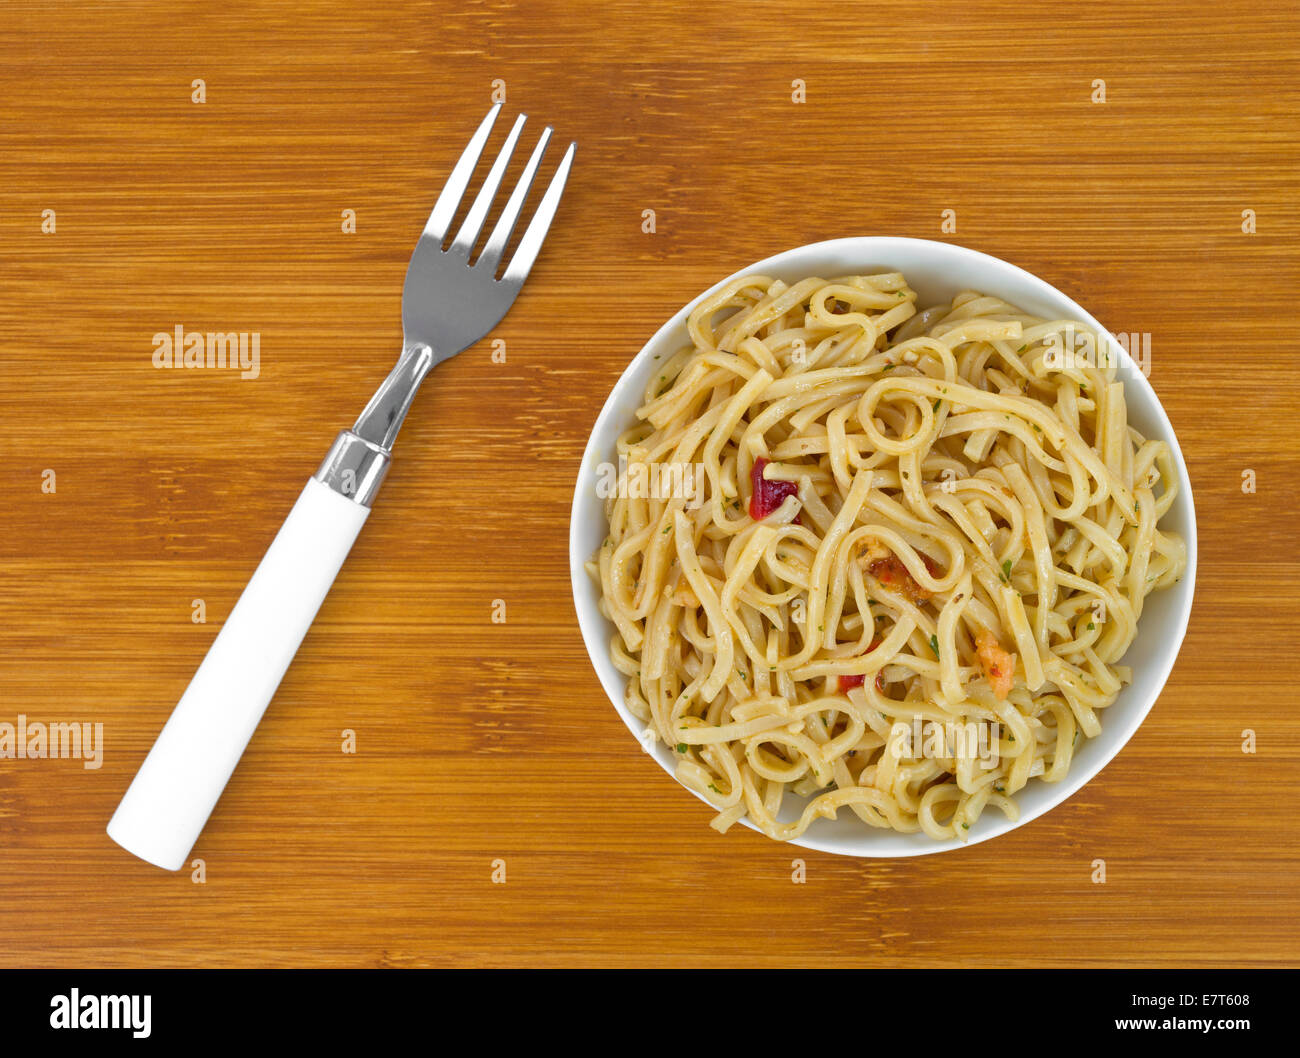 Top view of a serving of Chow Mein noodles with shrimp and seasonings in a small bowl with a fork to the side on a wood table to Stock Photo